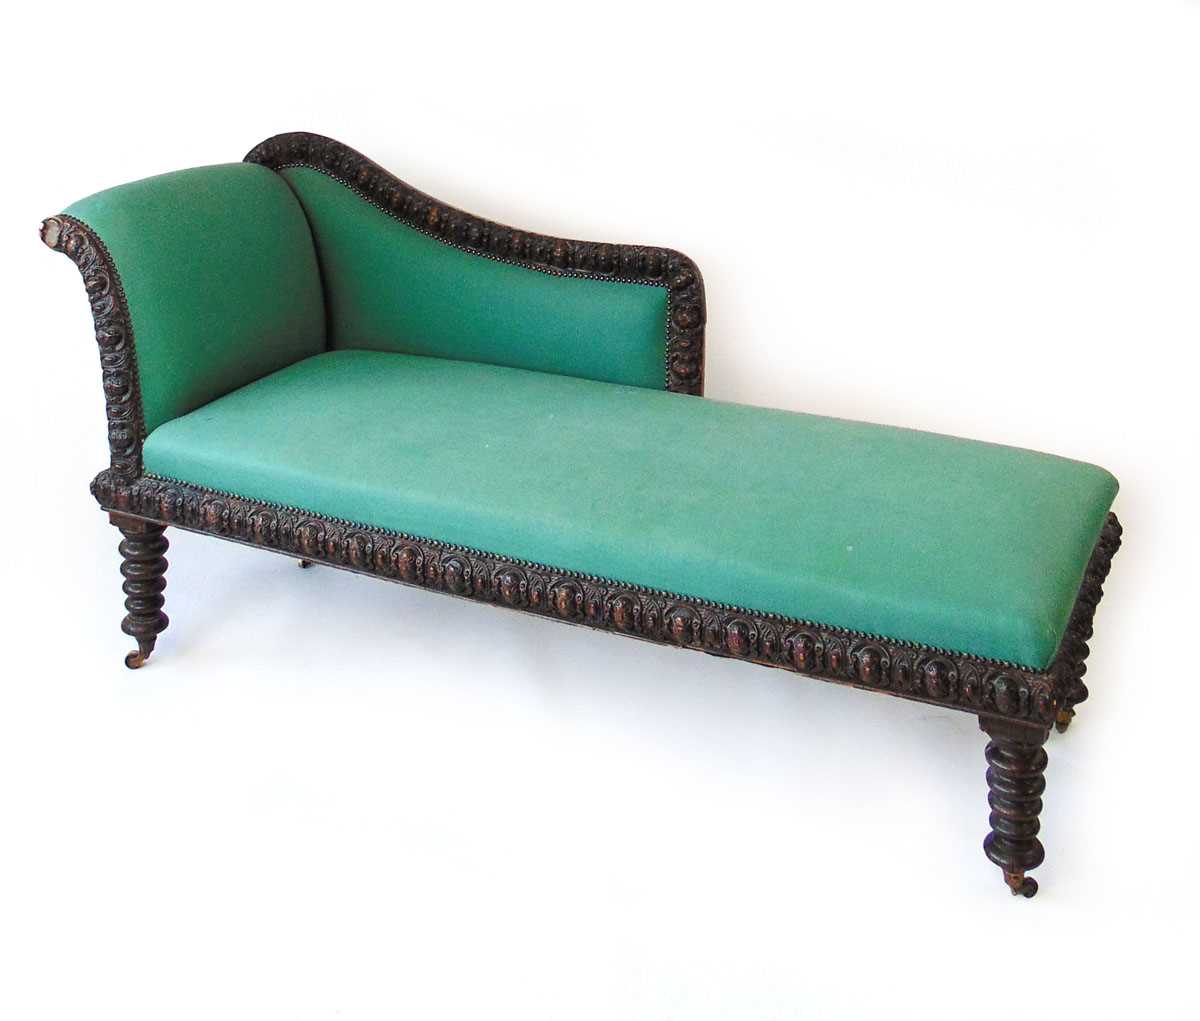 A 19th century oak chaise longue, the frame with a continuous band of oval foliate carved bosses, - Image 2 of 4